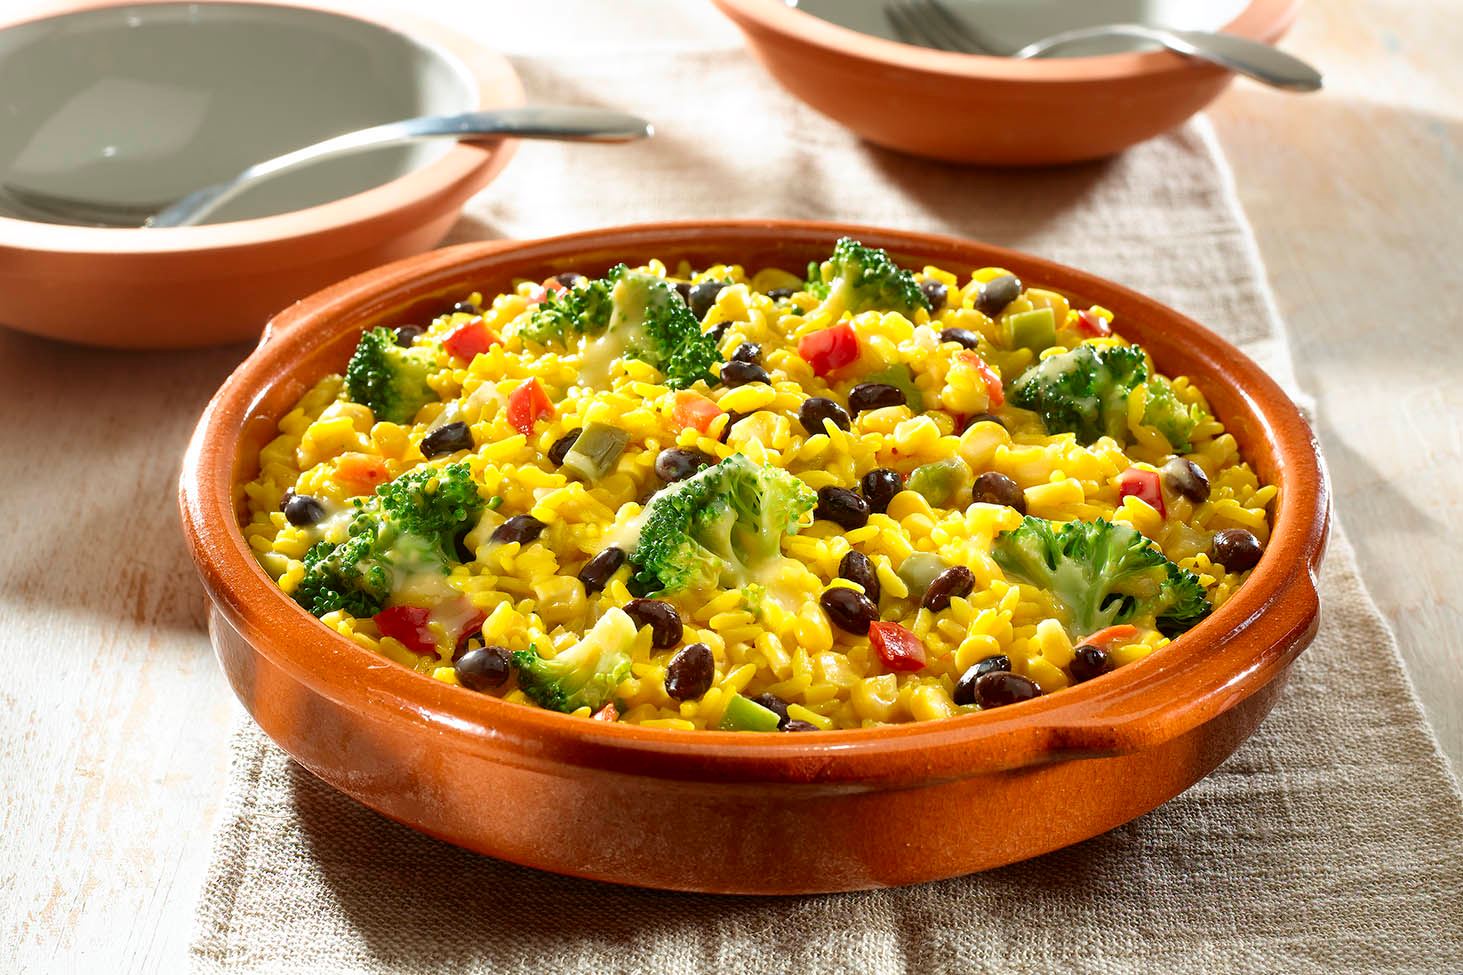 MyPlate Spanish Rice with Broccoli, Black Beans & Cheese